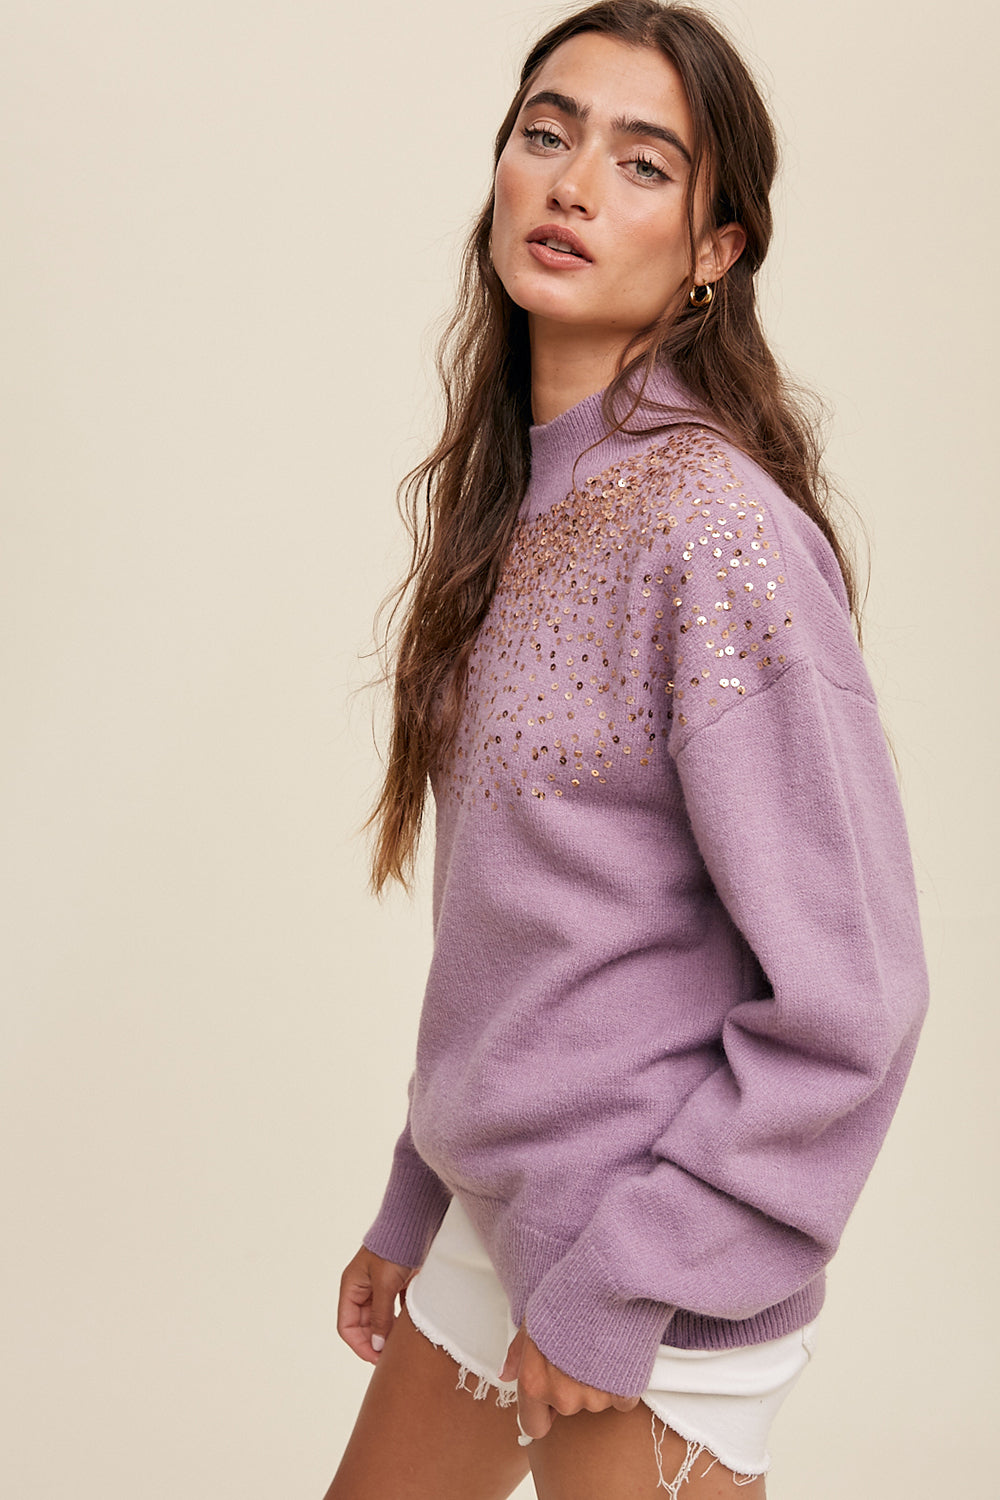 Sprinkled Sequin Sweater - Lavender-Sweater- Hometown Style HTS, women's in store and online boutique located in Ingersoll, Ontario